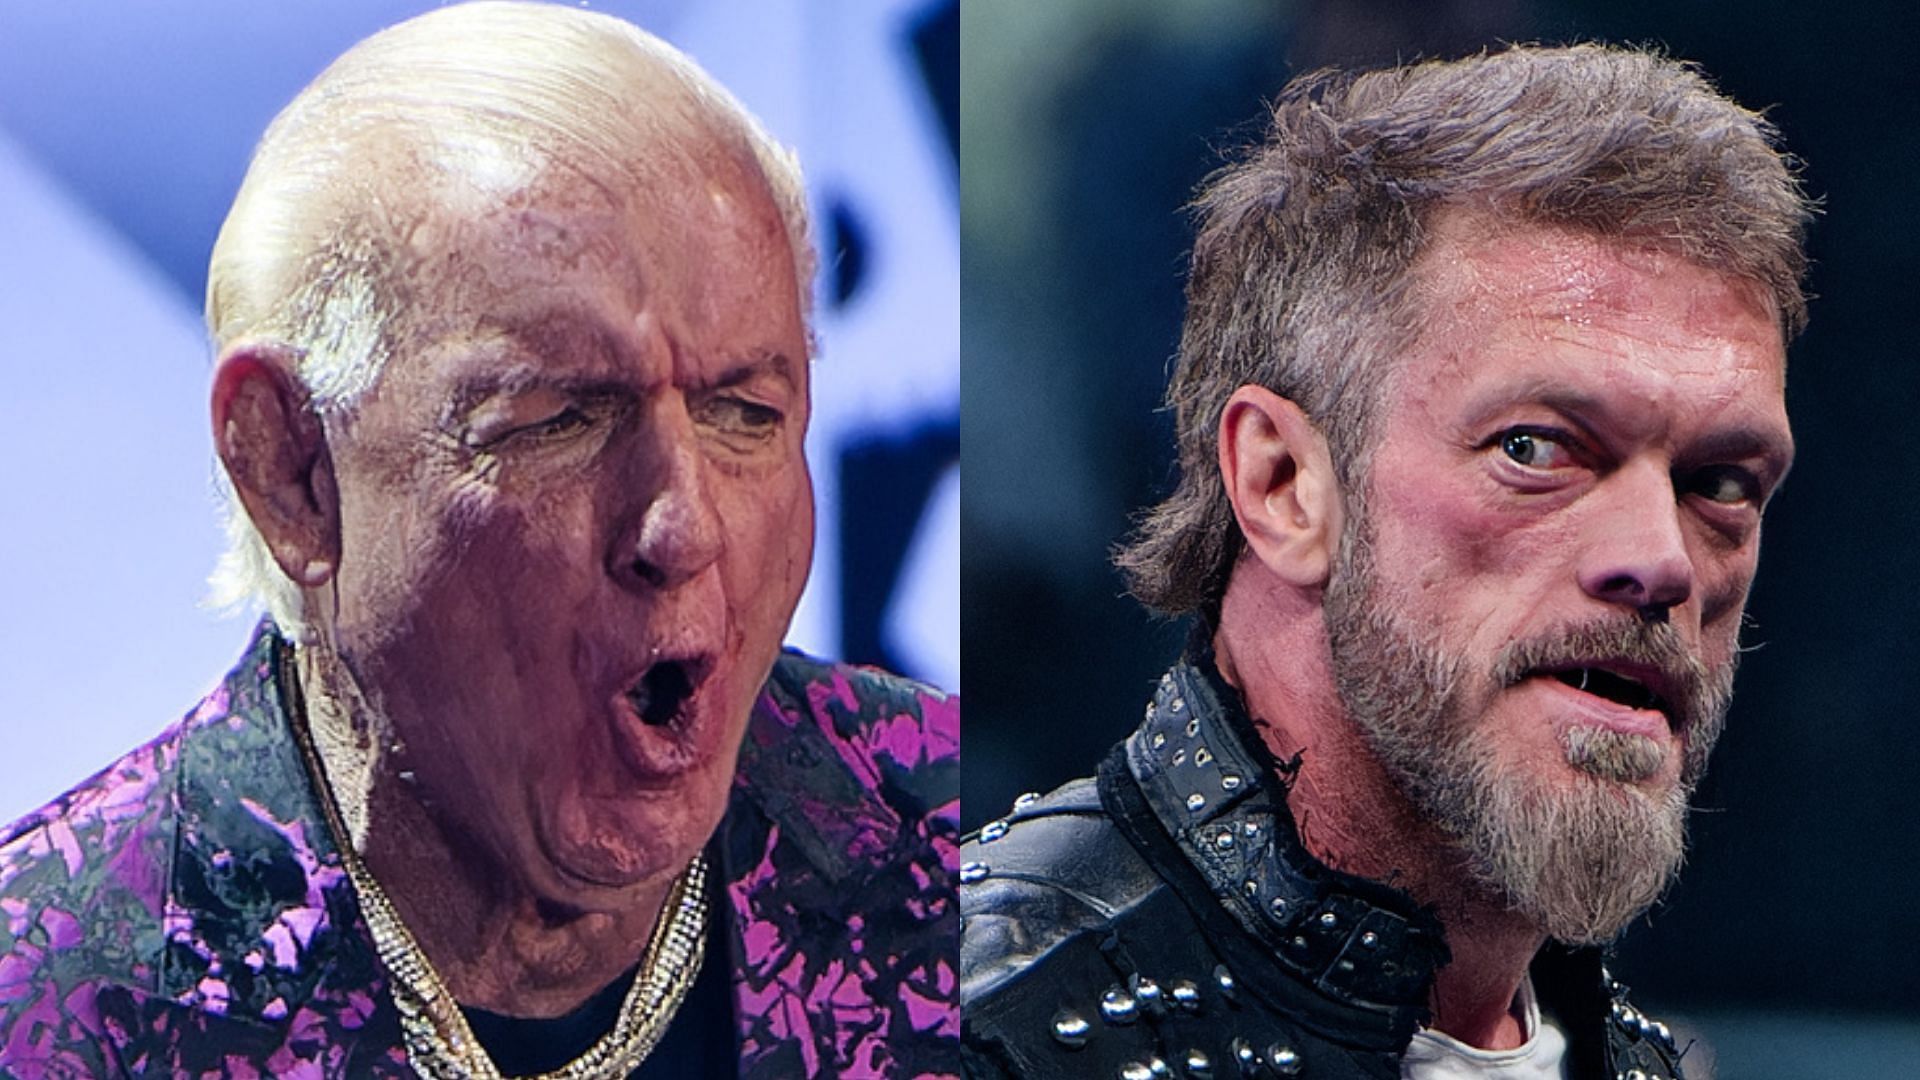 What are Ric Flair and Adam Copeland like backstage in AEW?